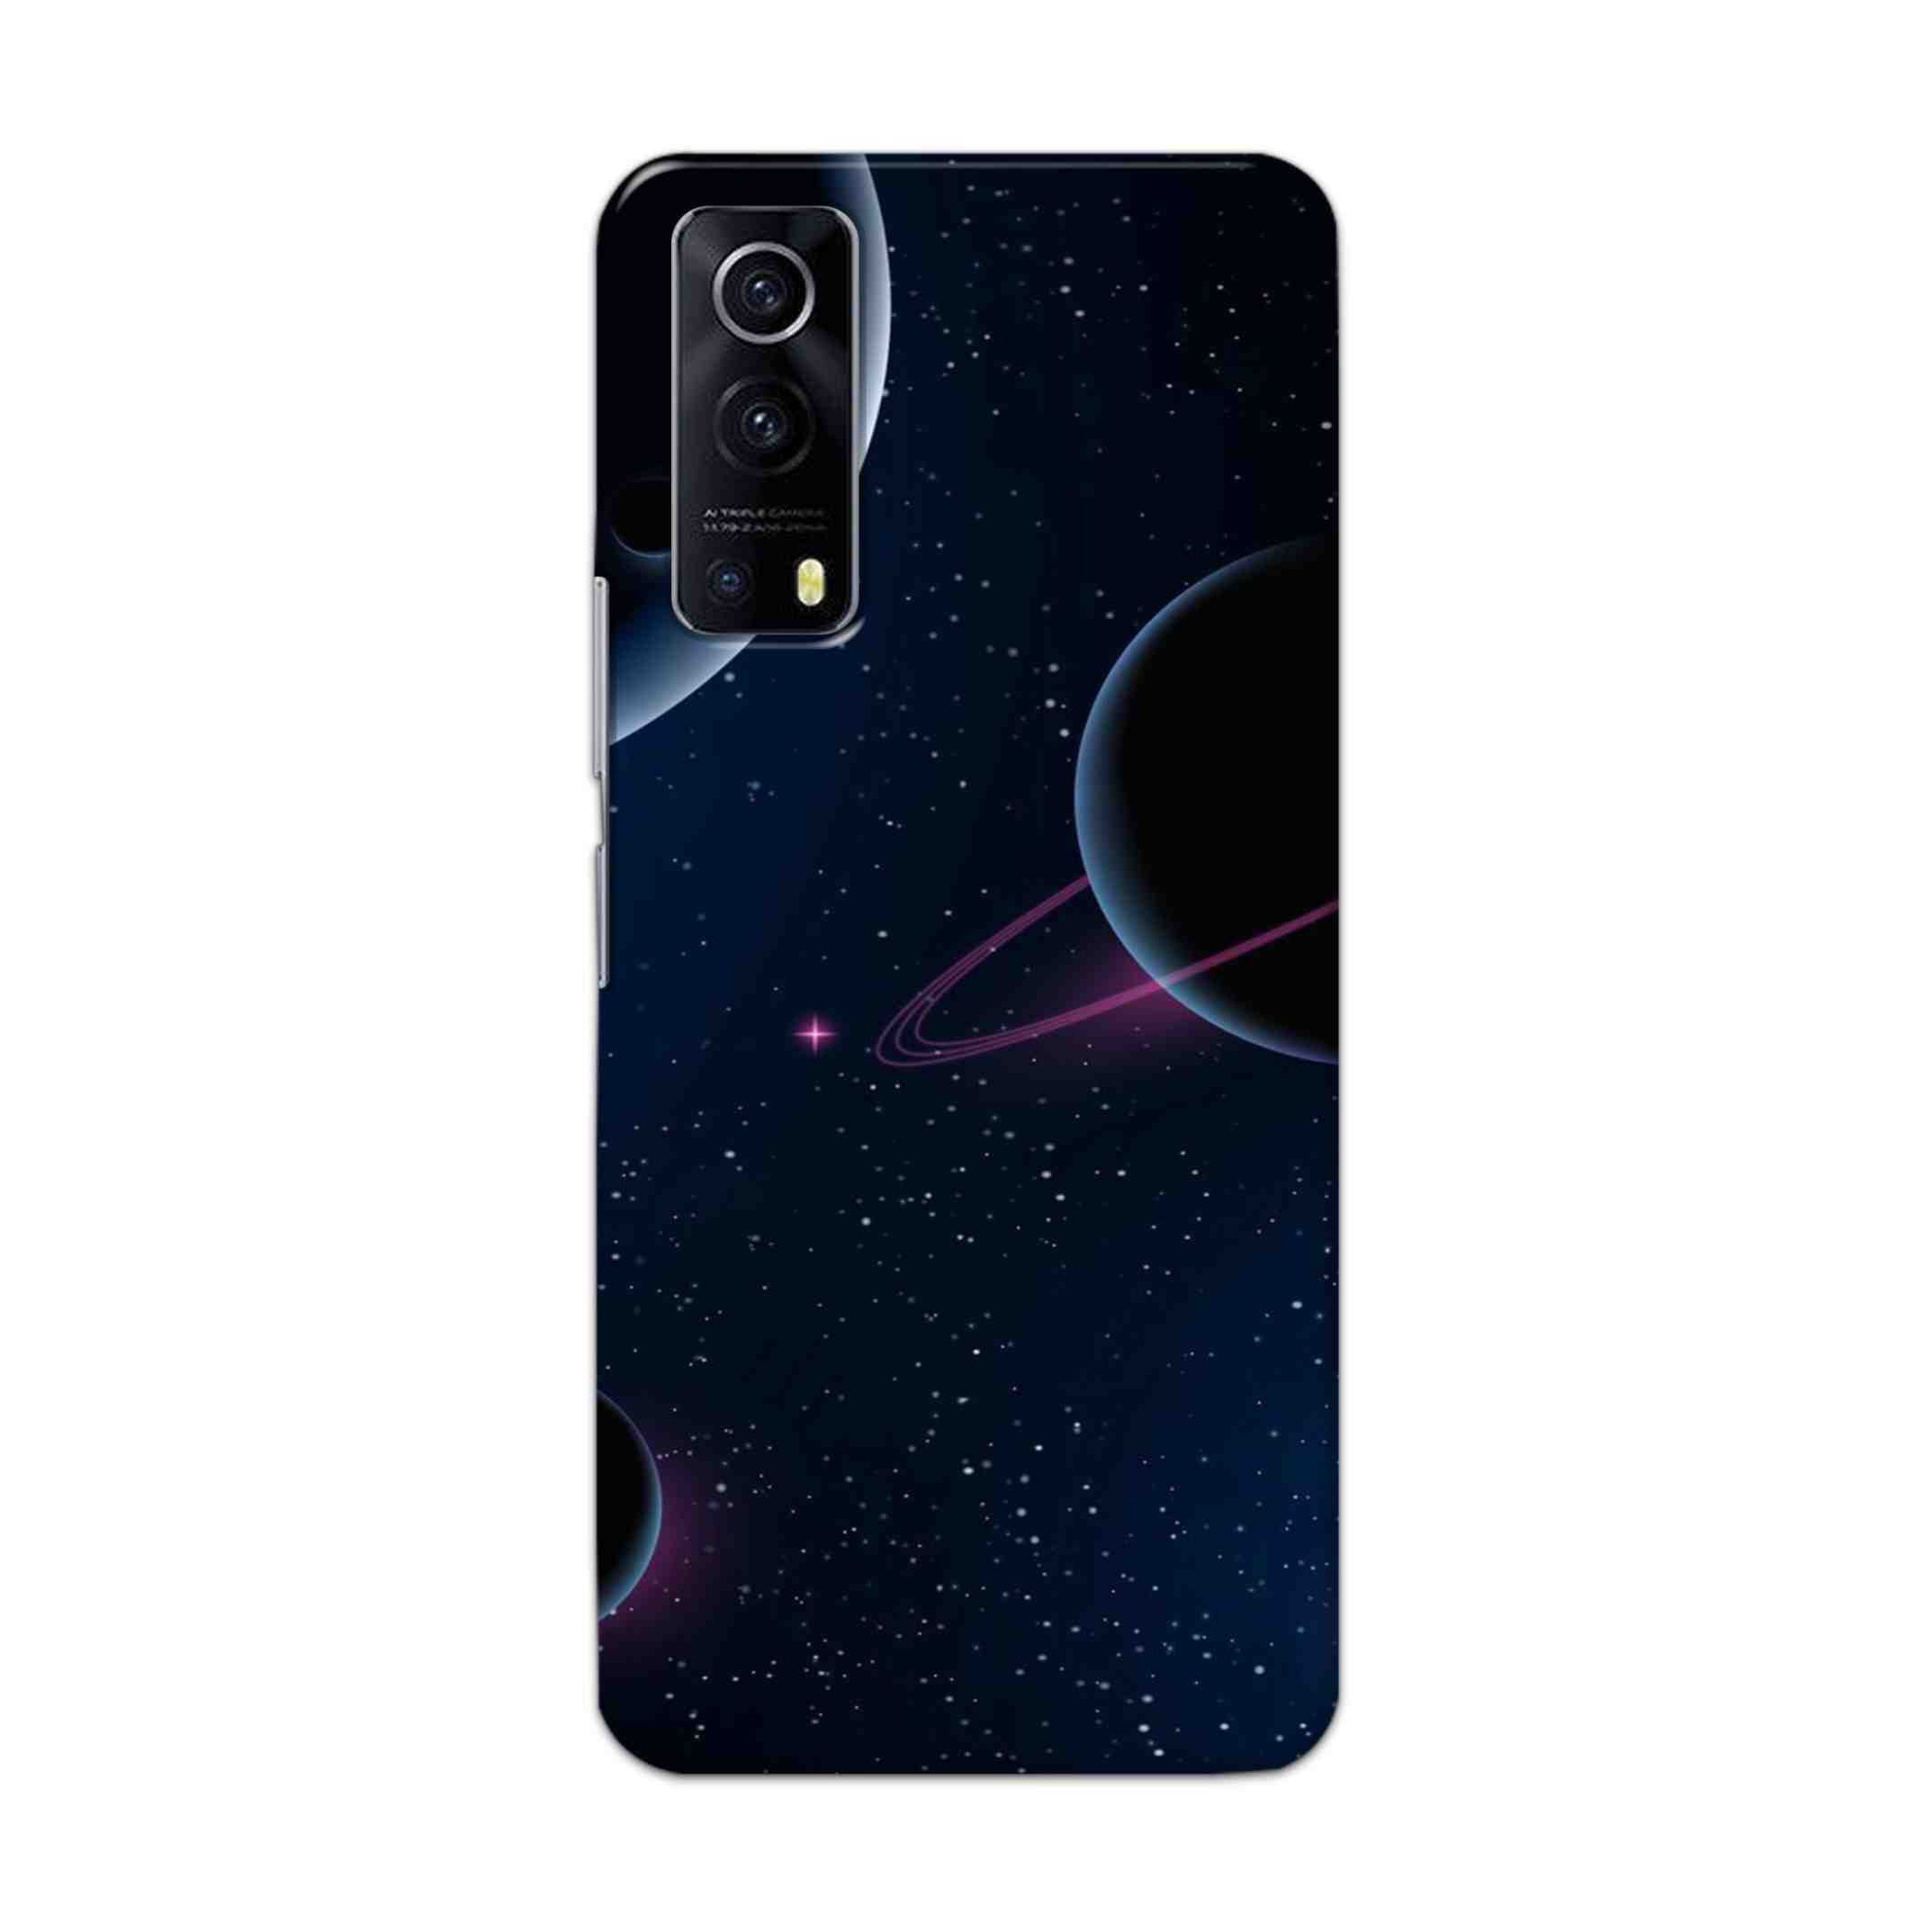 Buy Night Space Hard Back Mobile Phone Case Cover For Vivo IQOO Z3 Online